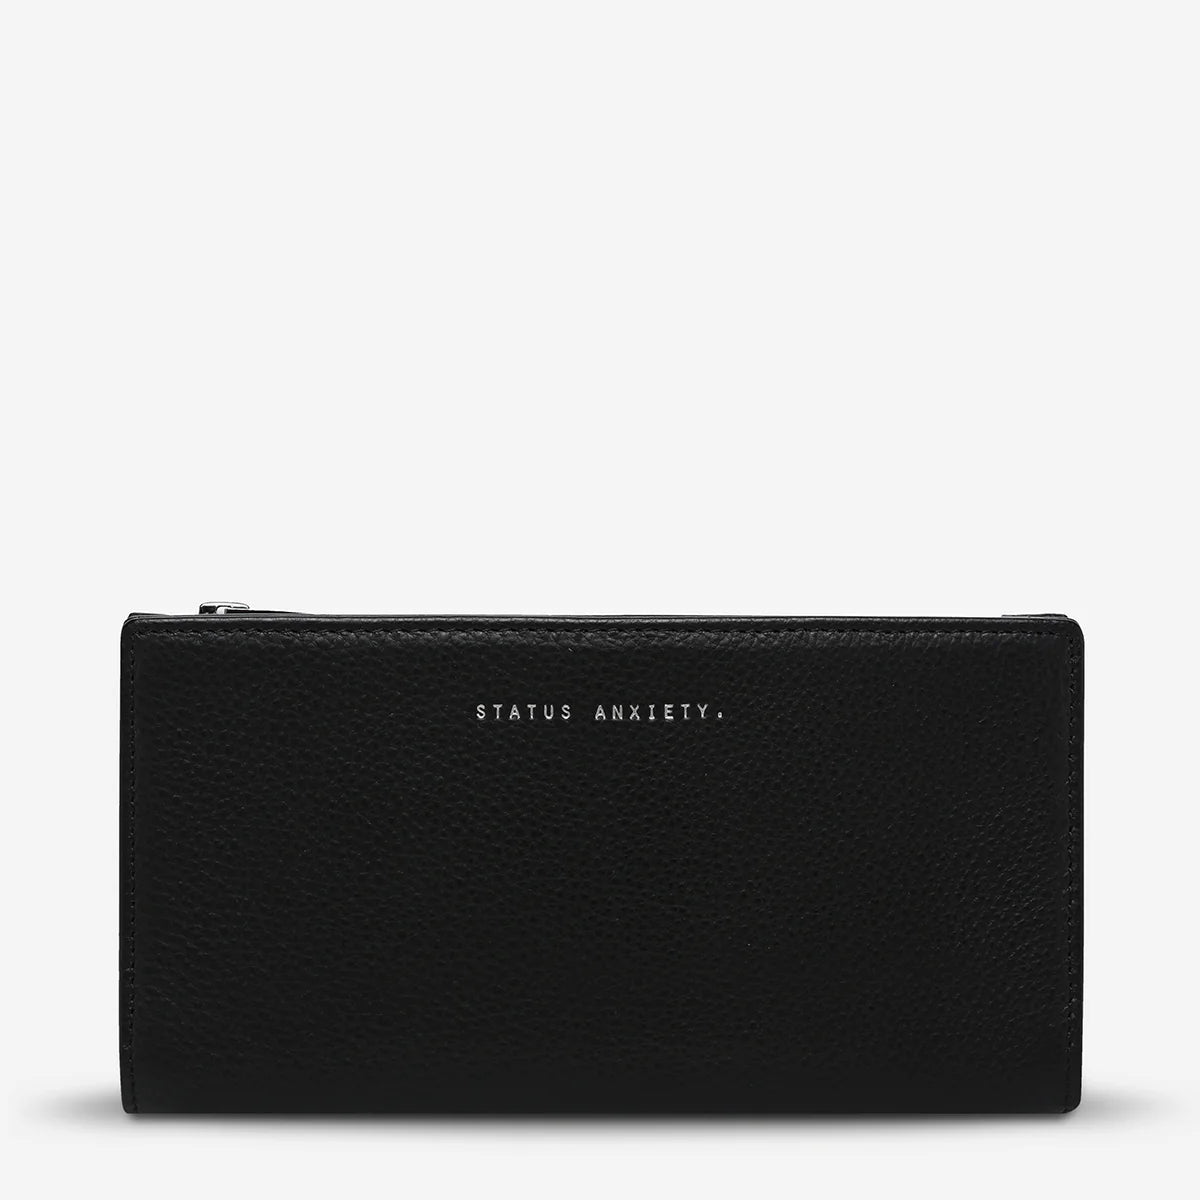 Status Anxiety Wallet Old Flame Black